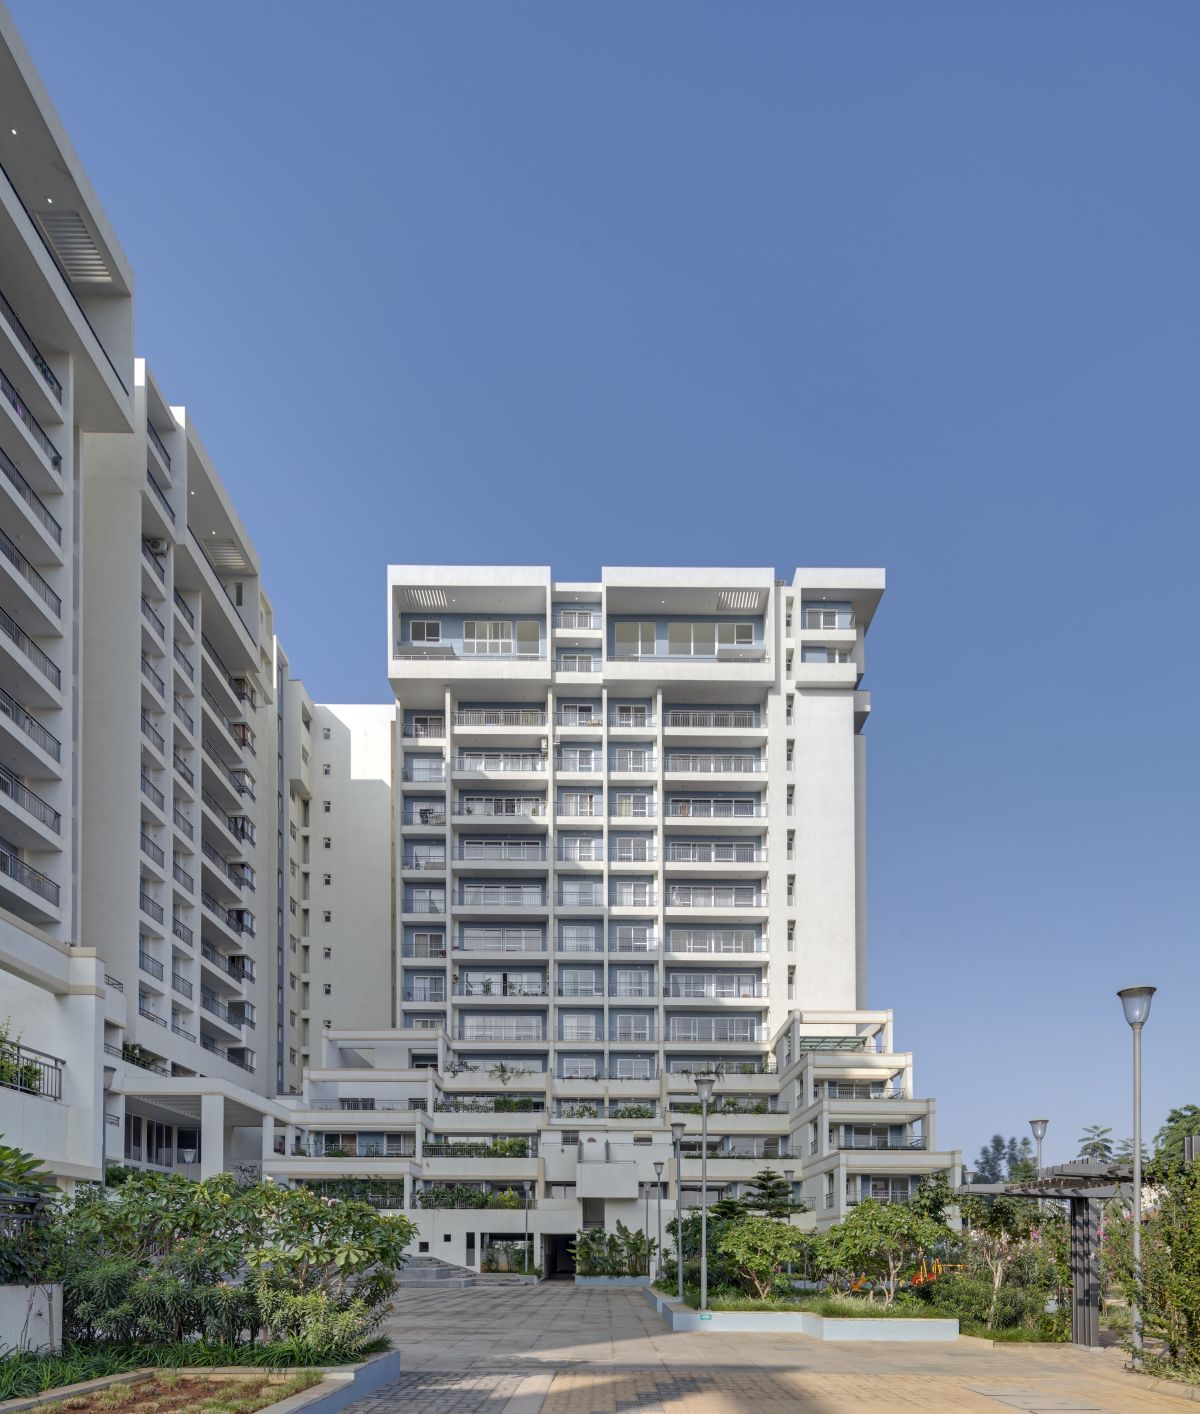 Terraced Residential Highrise, at Nallurhalli Road, Siddhapura, Bangalore, by CnT Architects 15